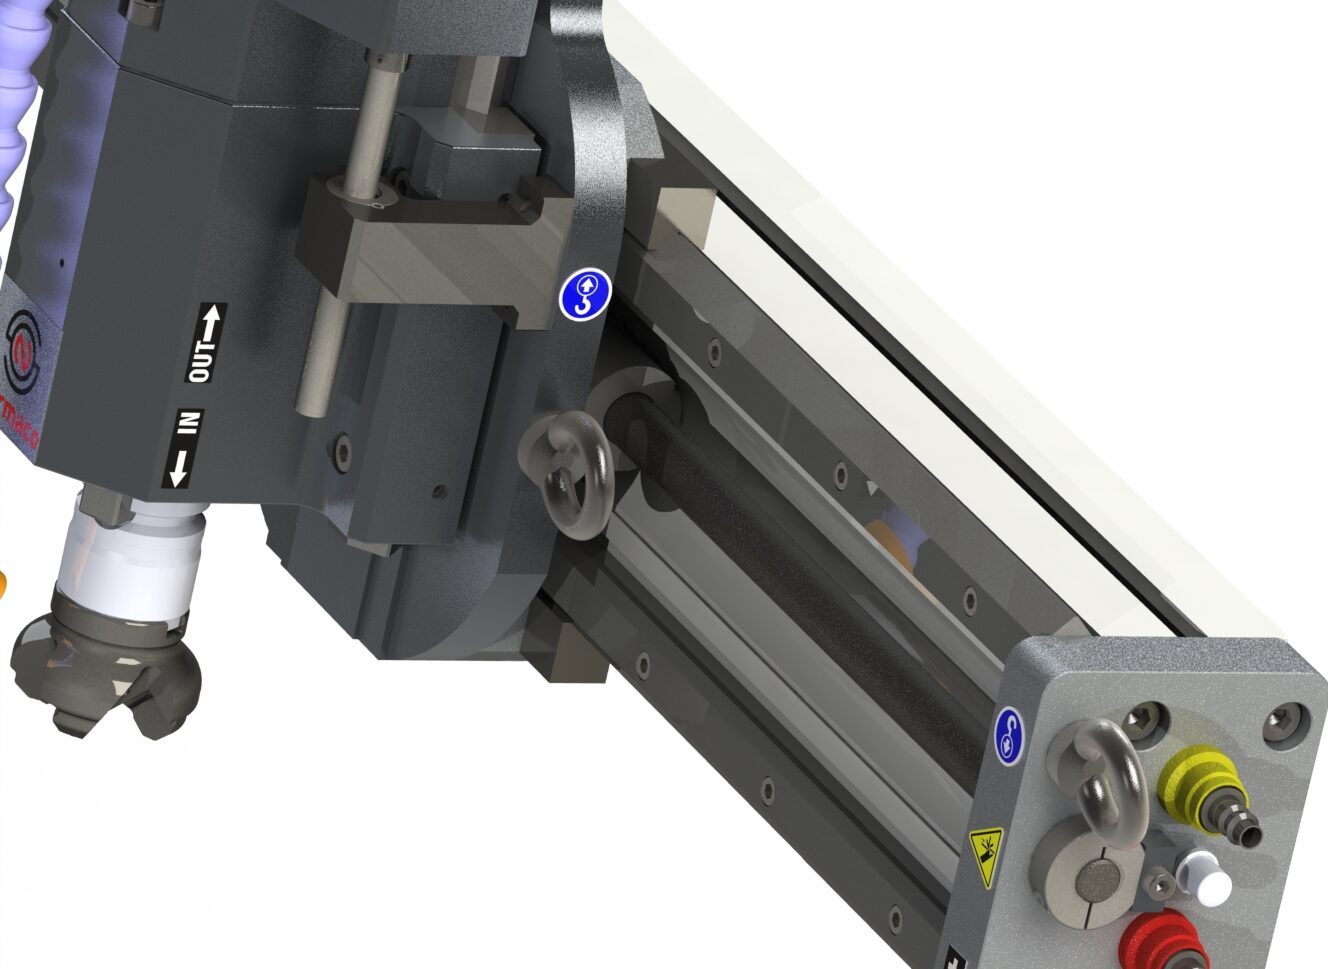 Normaco 2-axis portable milling rail